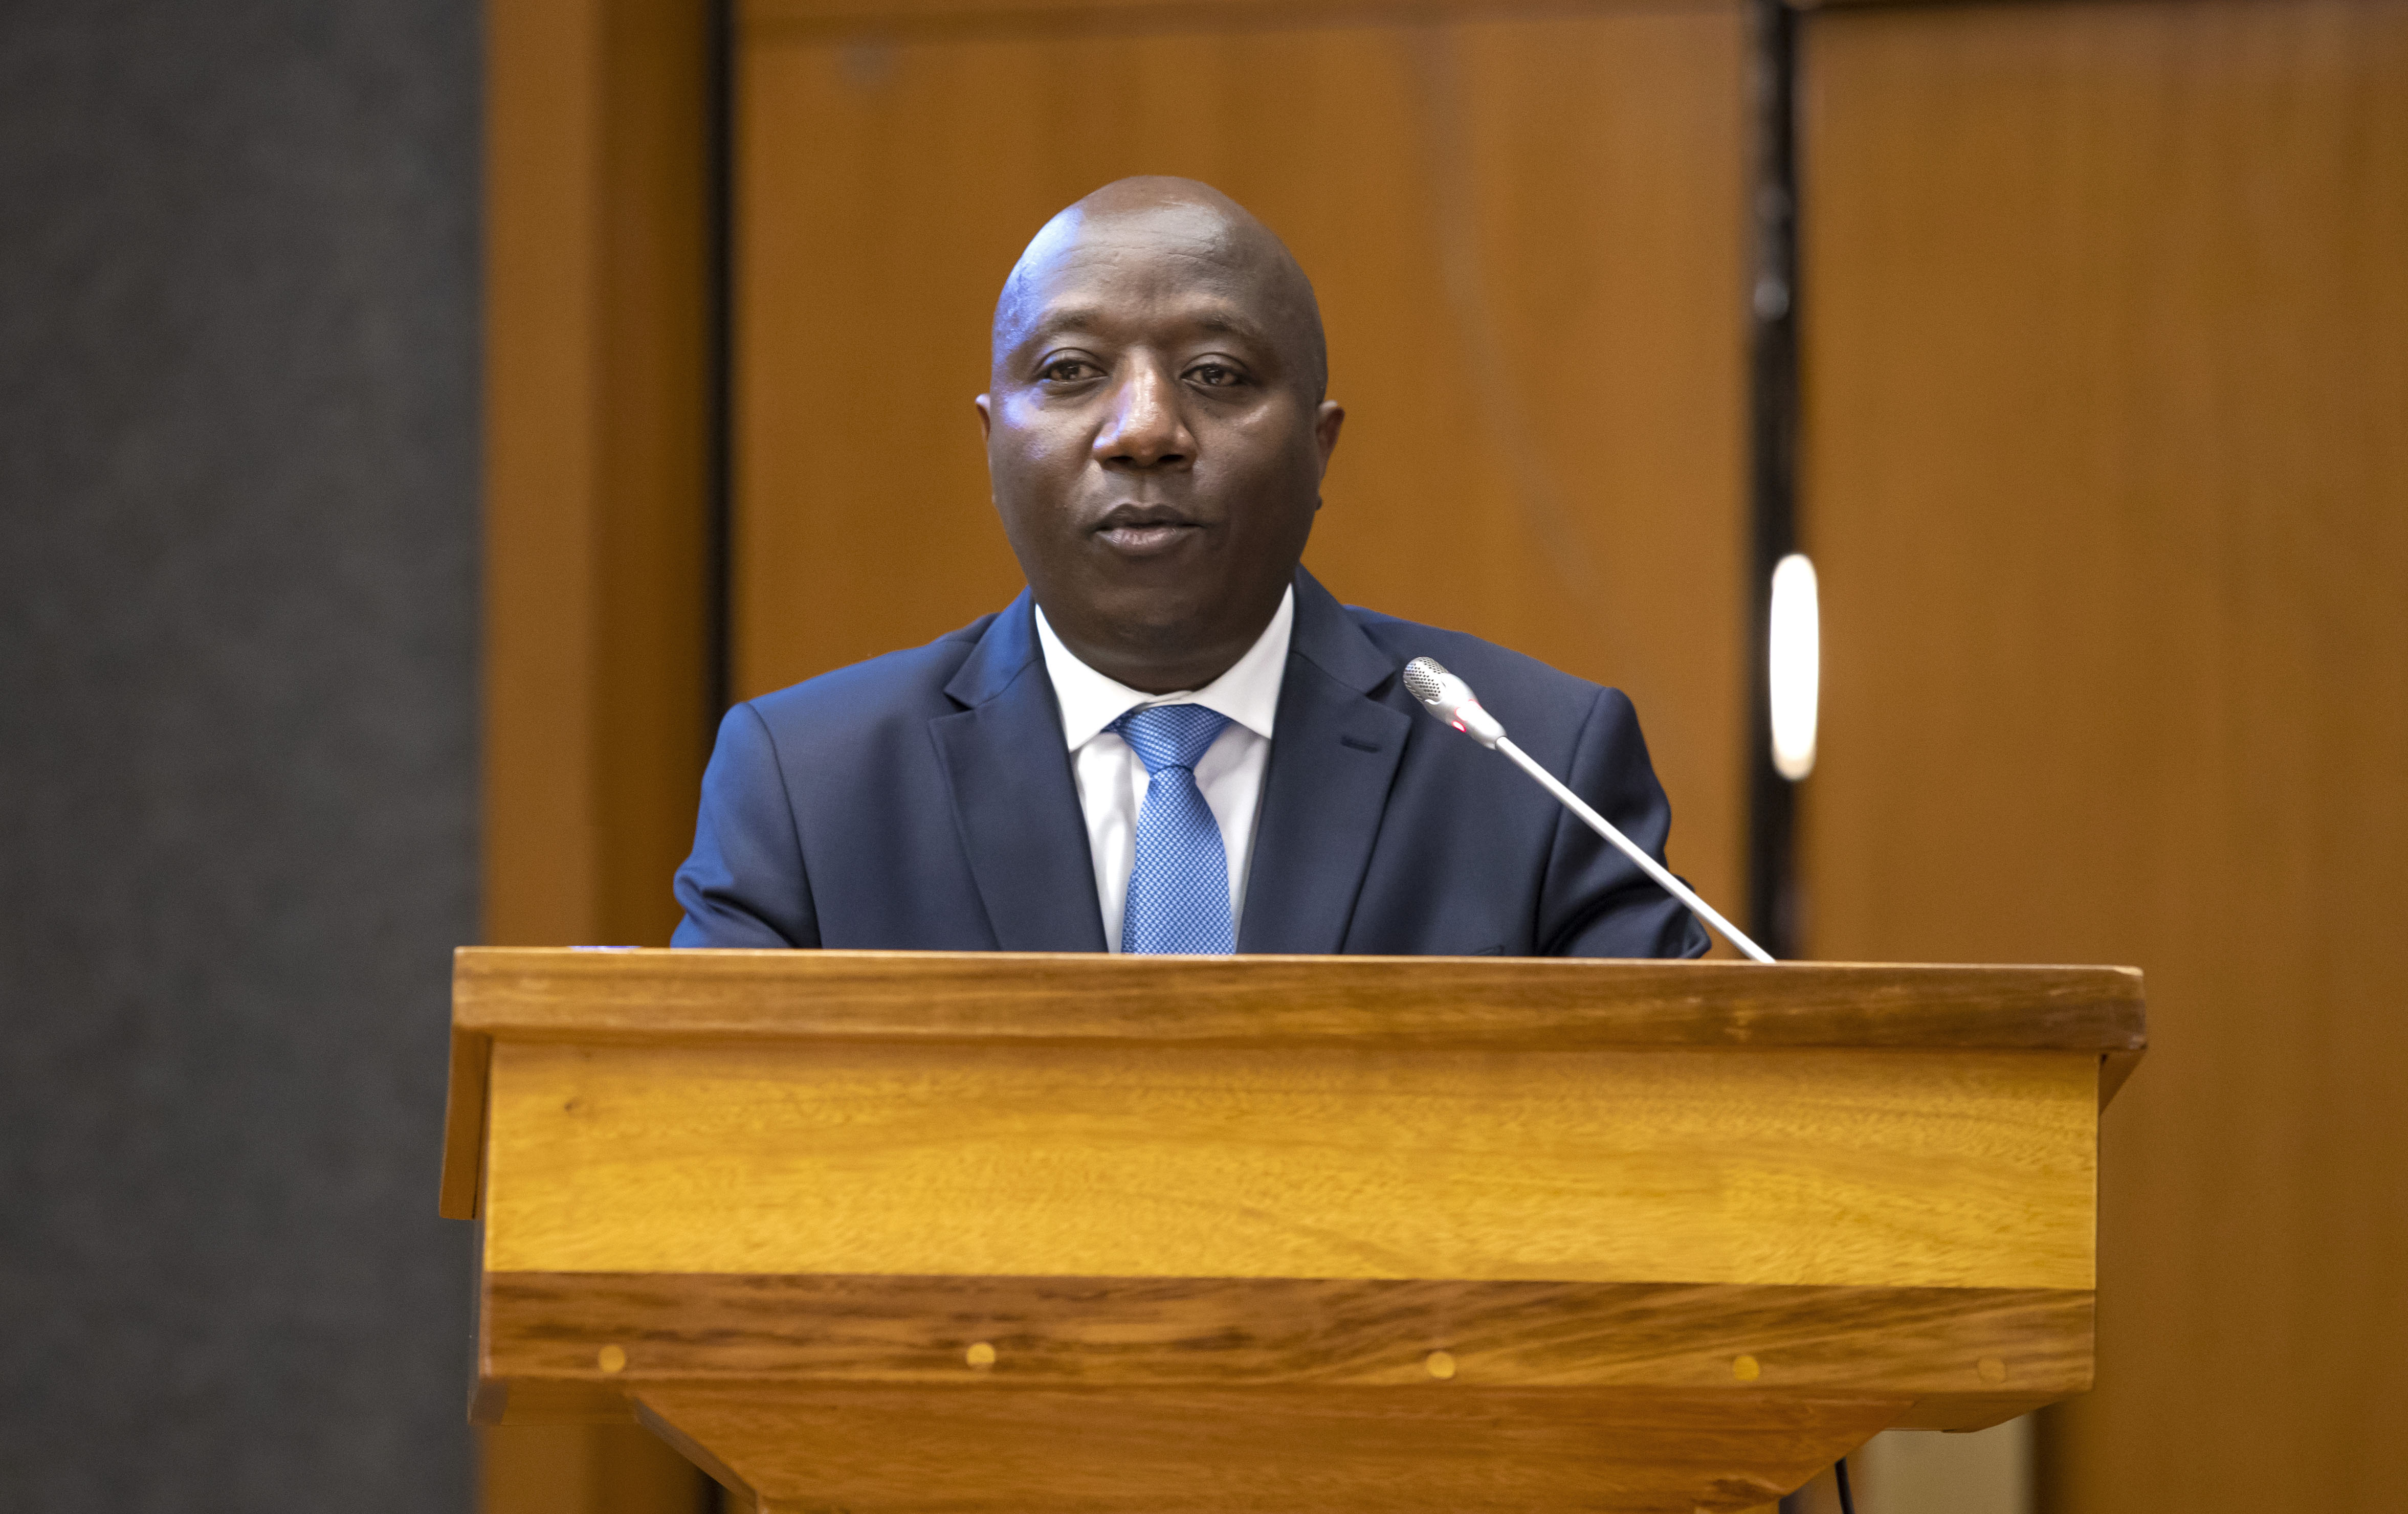 Prime Minister u00c9douard Ngirente addresses  both chambers of parliament on Tuesday, December 1.Ngirente was updating lawmakers on the progress made towards improving the education .Sam Ngendahimana